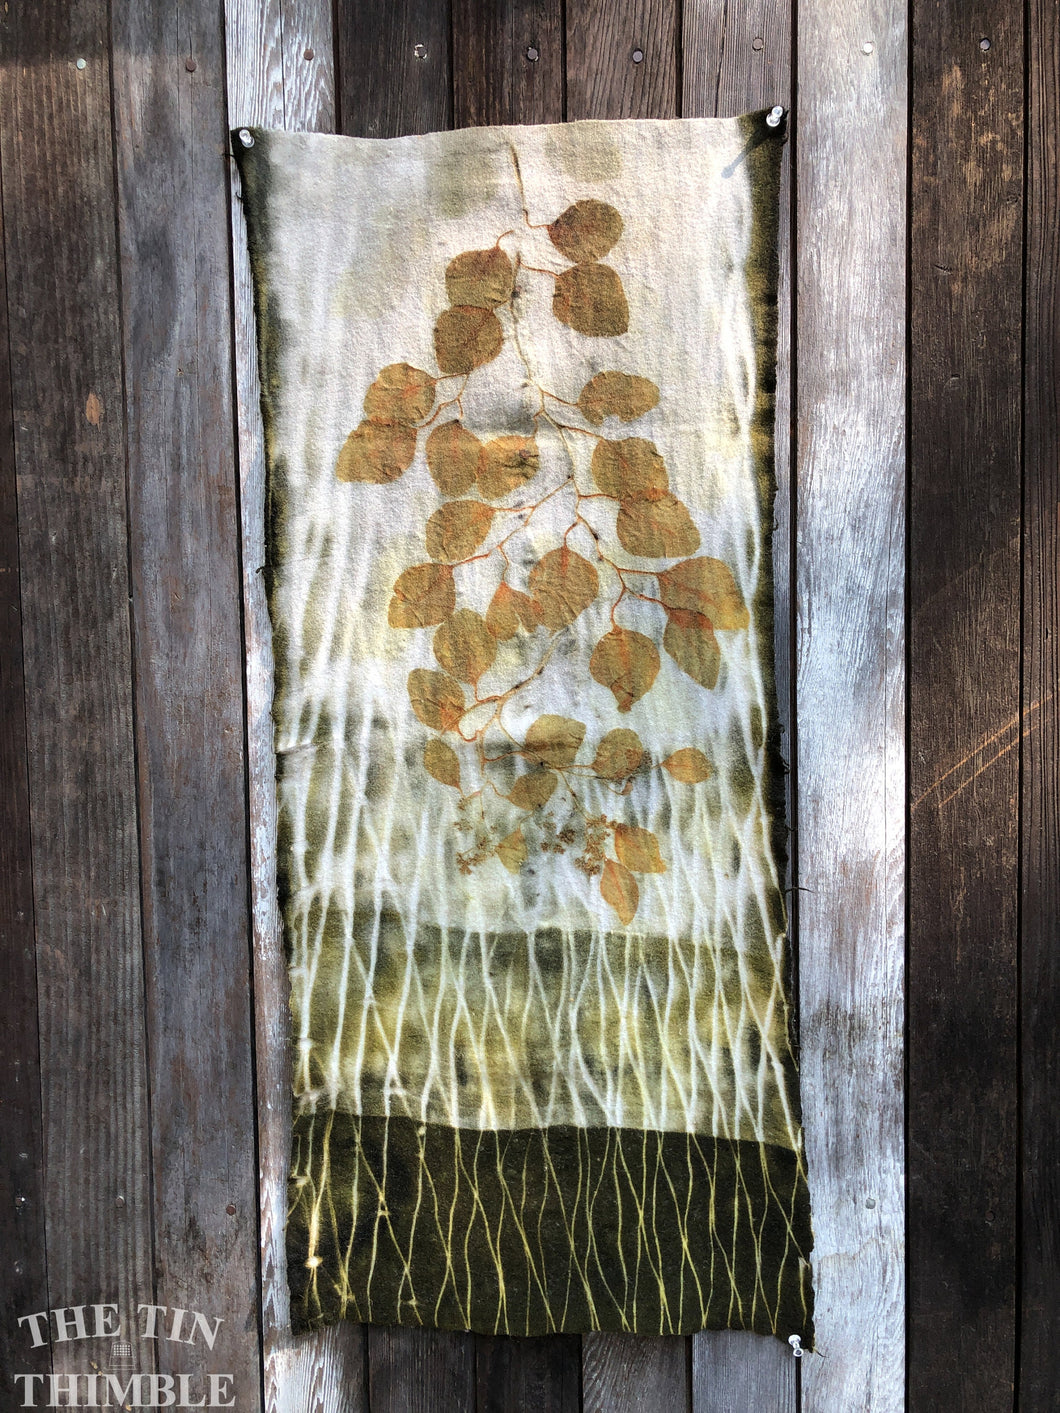 Botanical Printed Table Runner by Sharon Mansfield  - Natural Leaves Printed on USA Produced 100% Wool Fabric - Colorfast & Washable